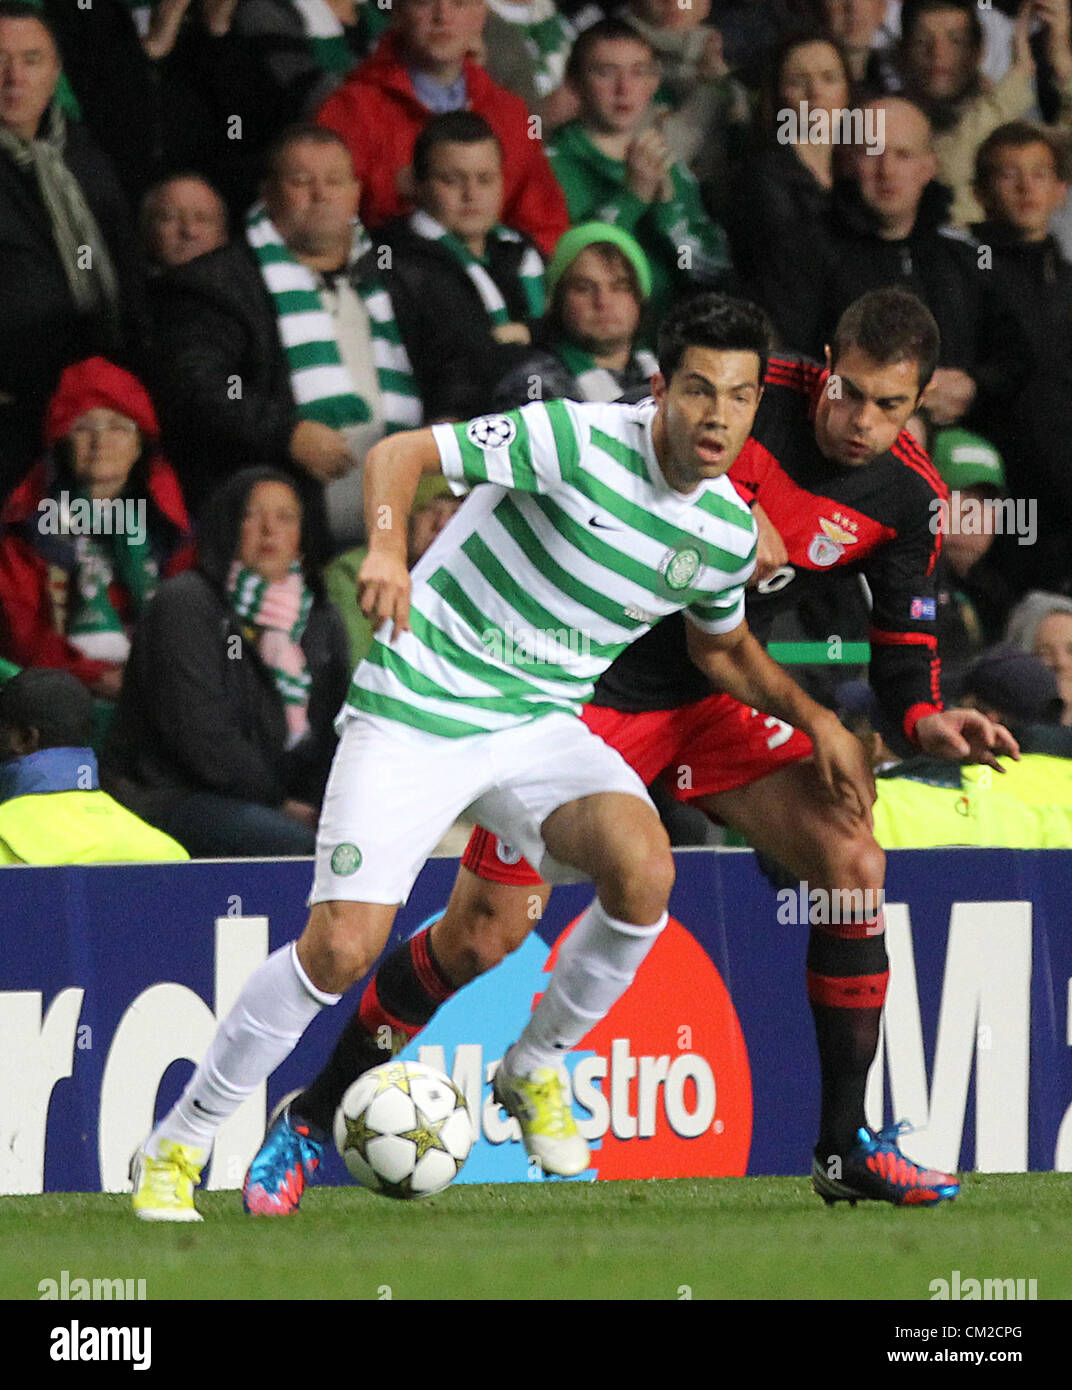 UEFA Champions League Football - Season 2012-13 Group G. Celtic FC v  Benfica FC. Celtic's Miku holds of Benfica's jardel in action during The UEFA  Champions League Group G match between Celtic